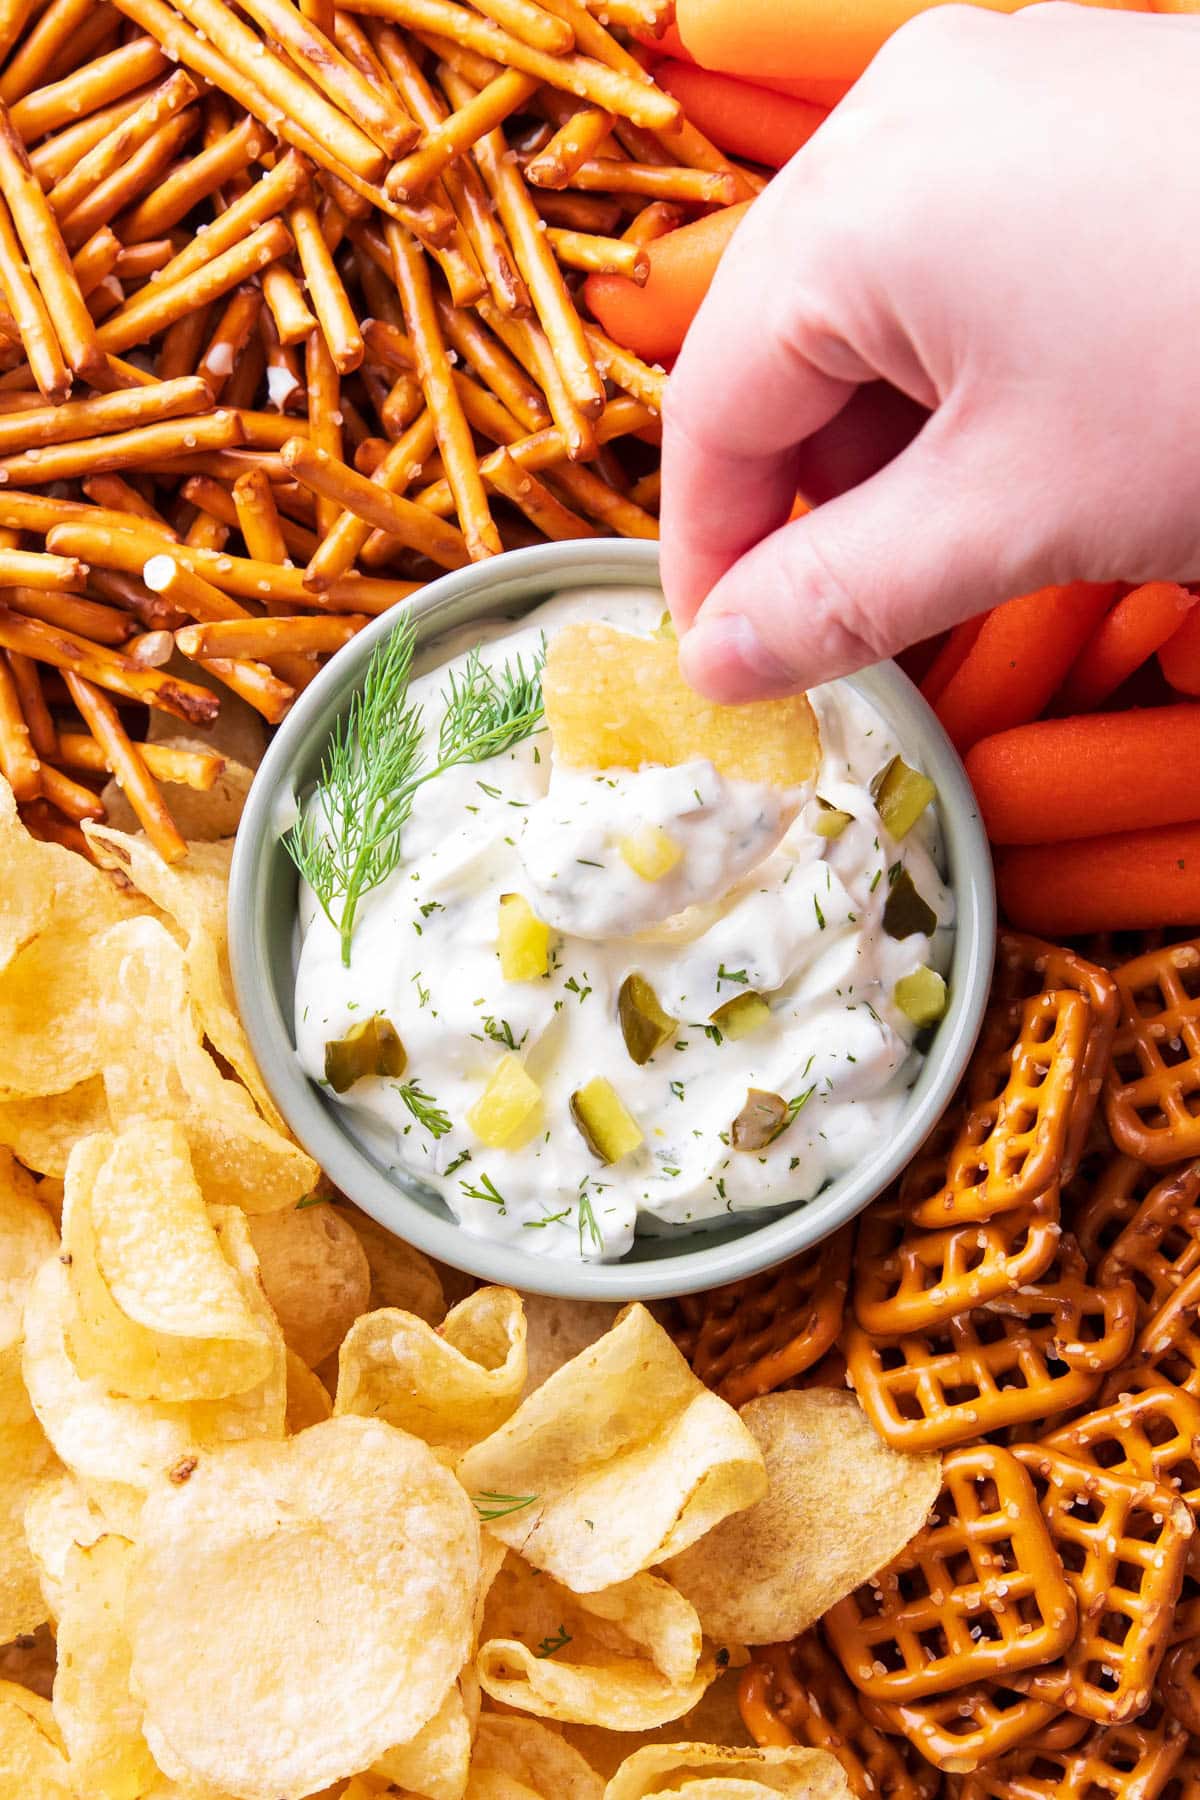 Dipping a crisp potato chip into this homemade condiment in a bowl topped with pickles and herbs.